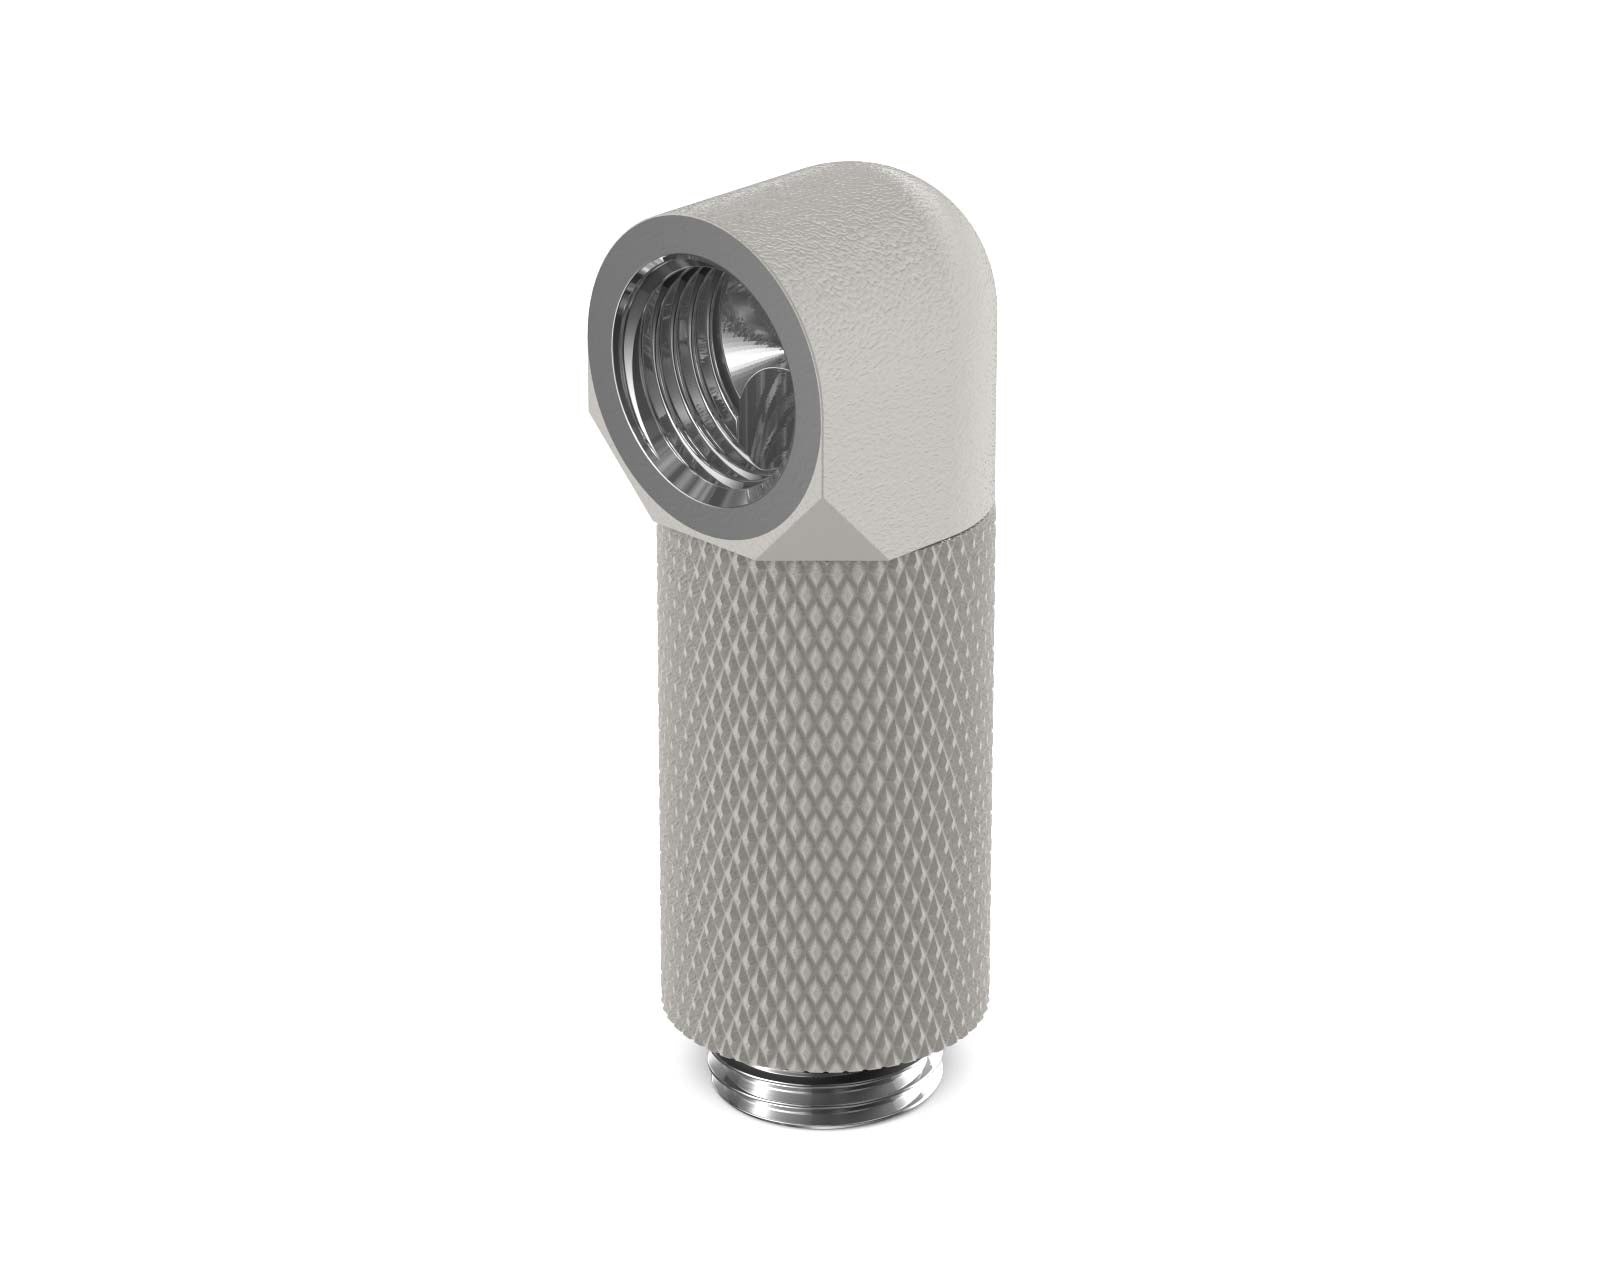 PrimoChill Male to Female G 1/4in. 90 Degree SX Rotary 30mm Extension Elbow Fitting - PrimoChill - KEEPING IT COOL TX Matte Silver